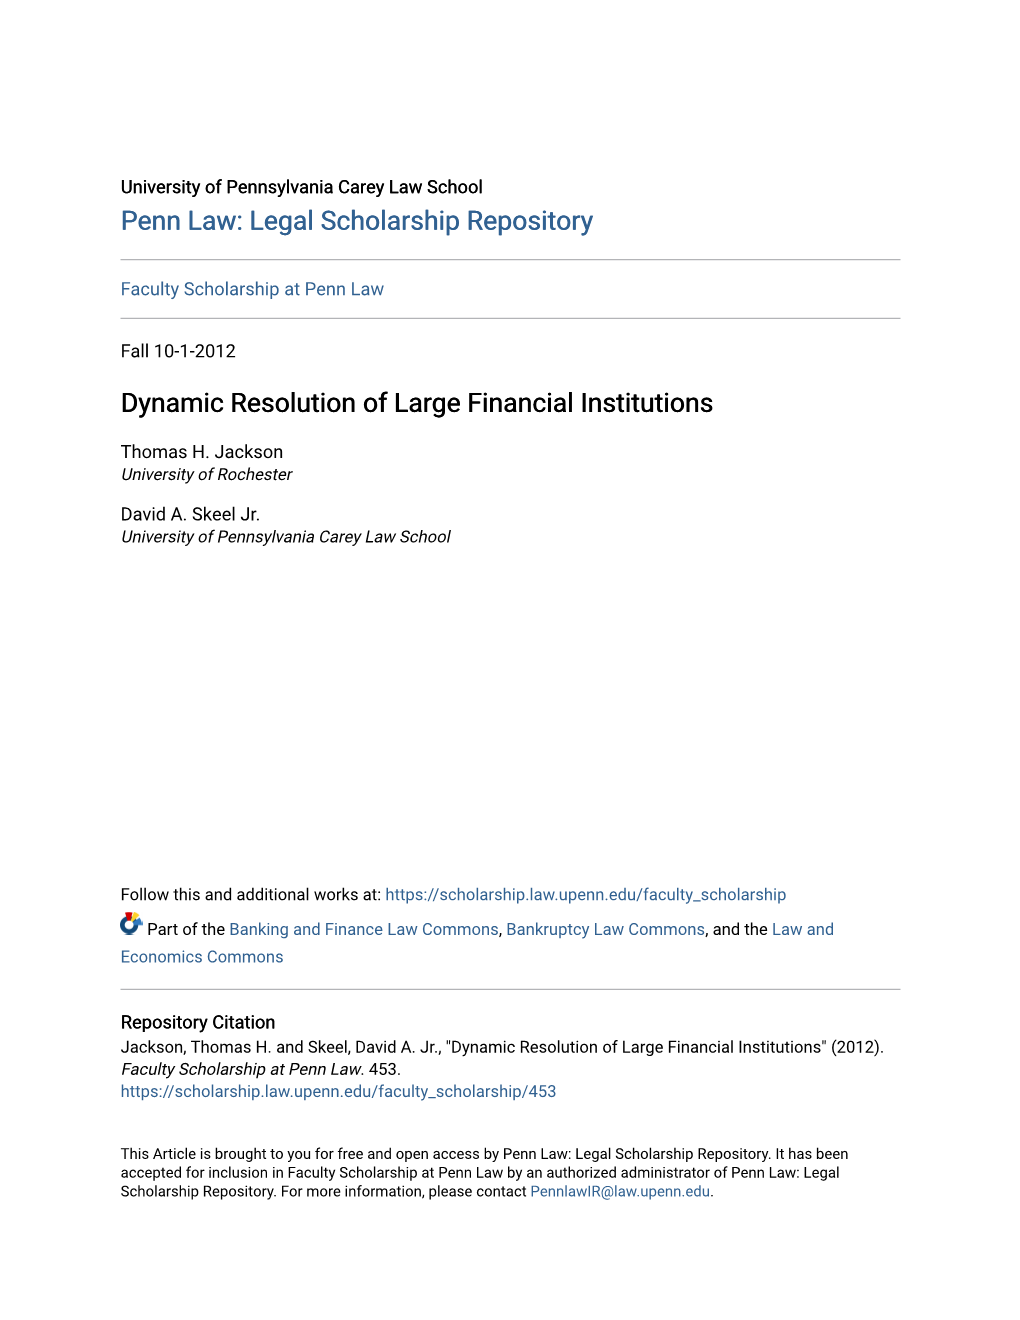 Dynamic Resolution of Large Financial Institutions